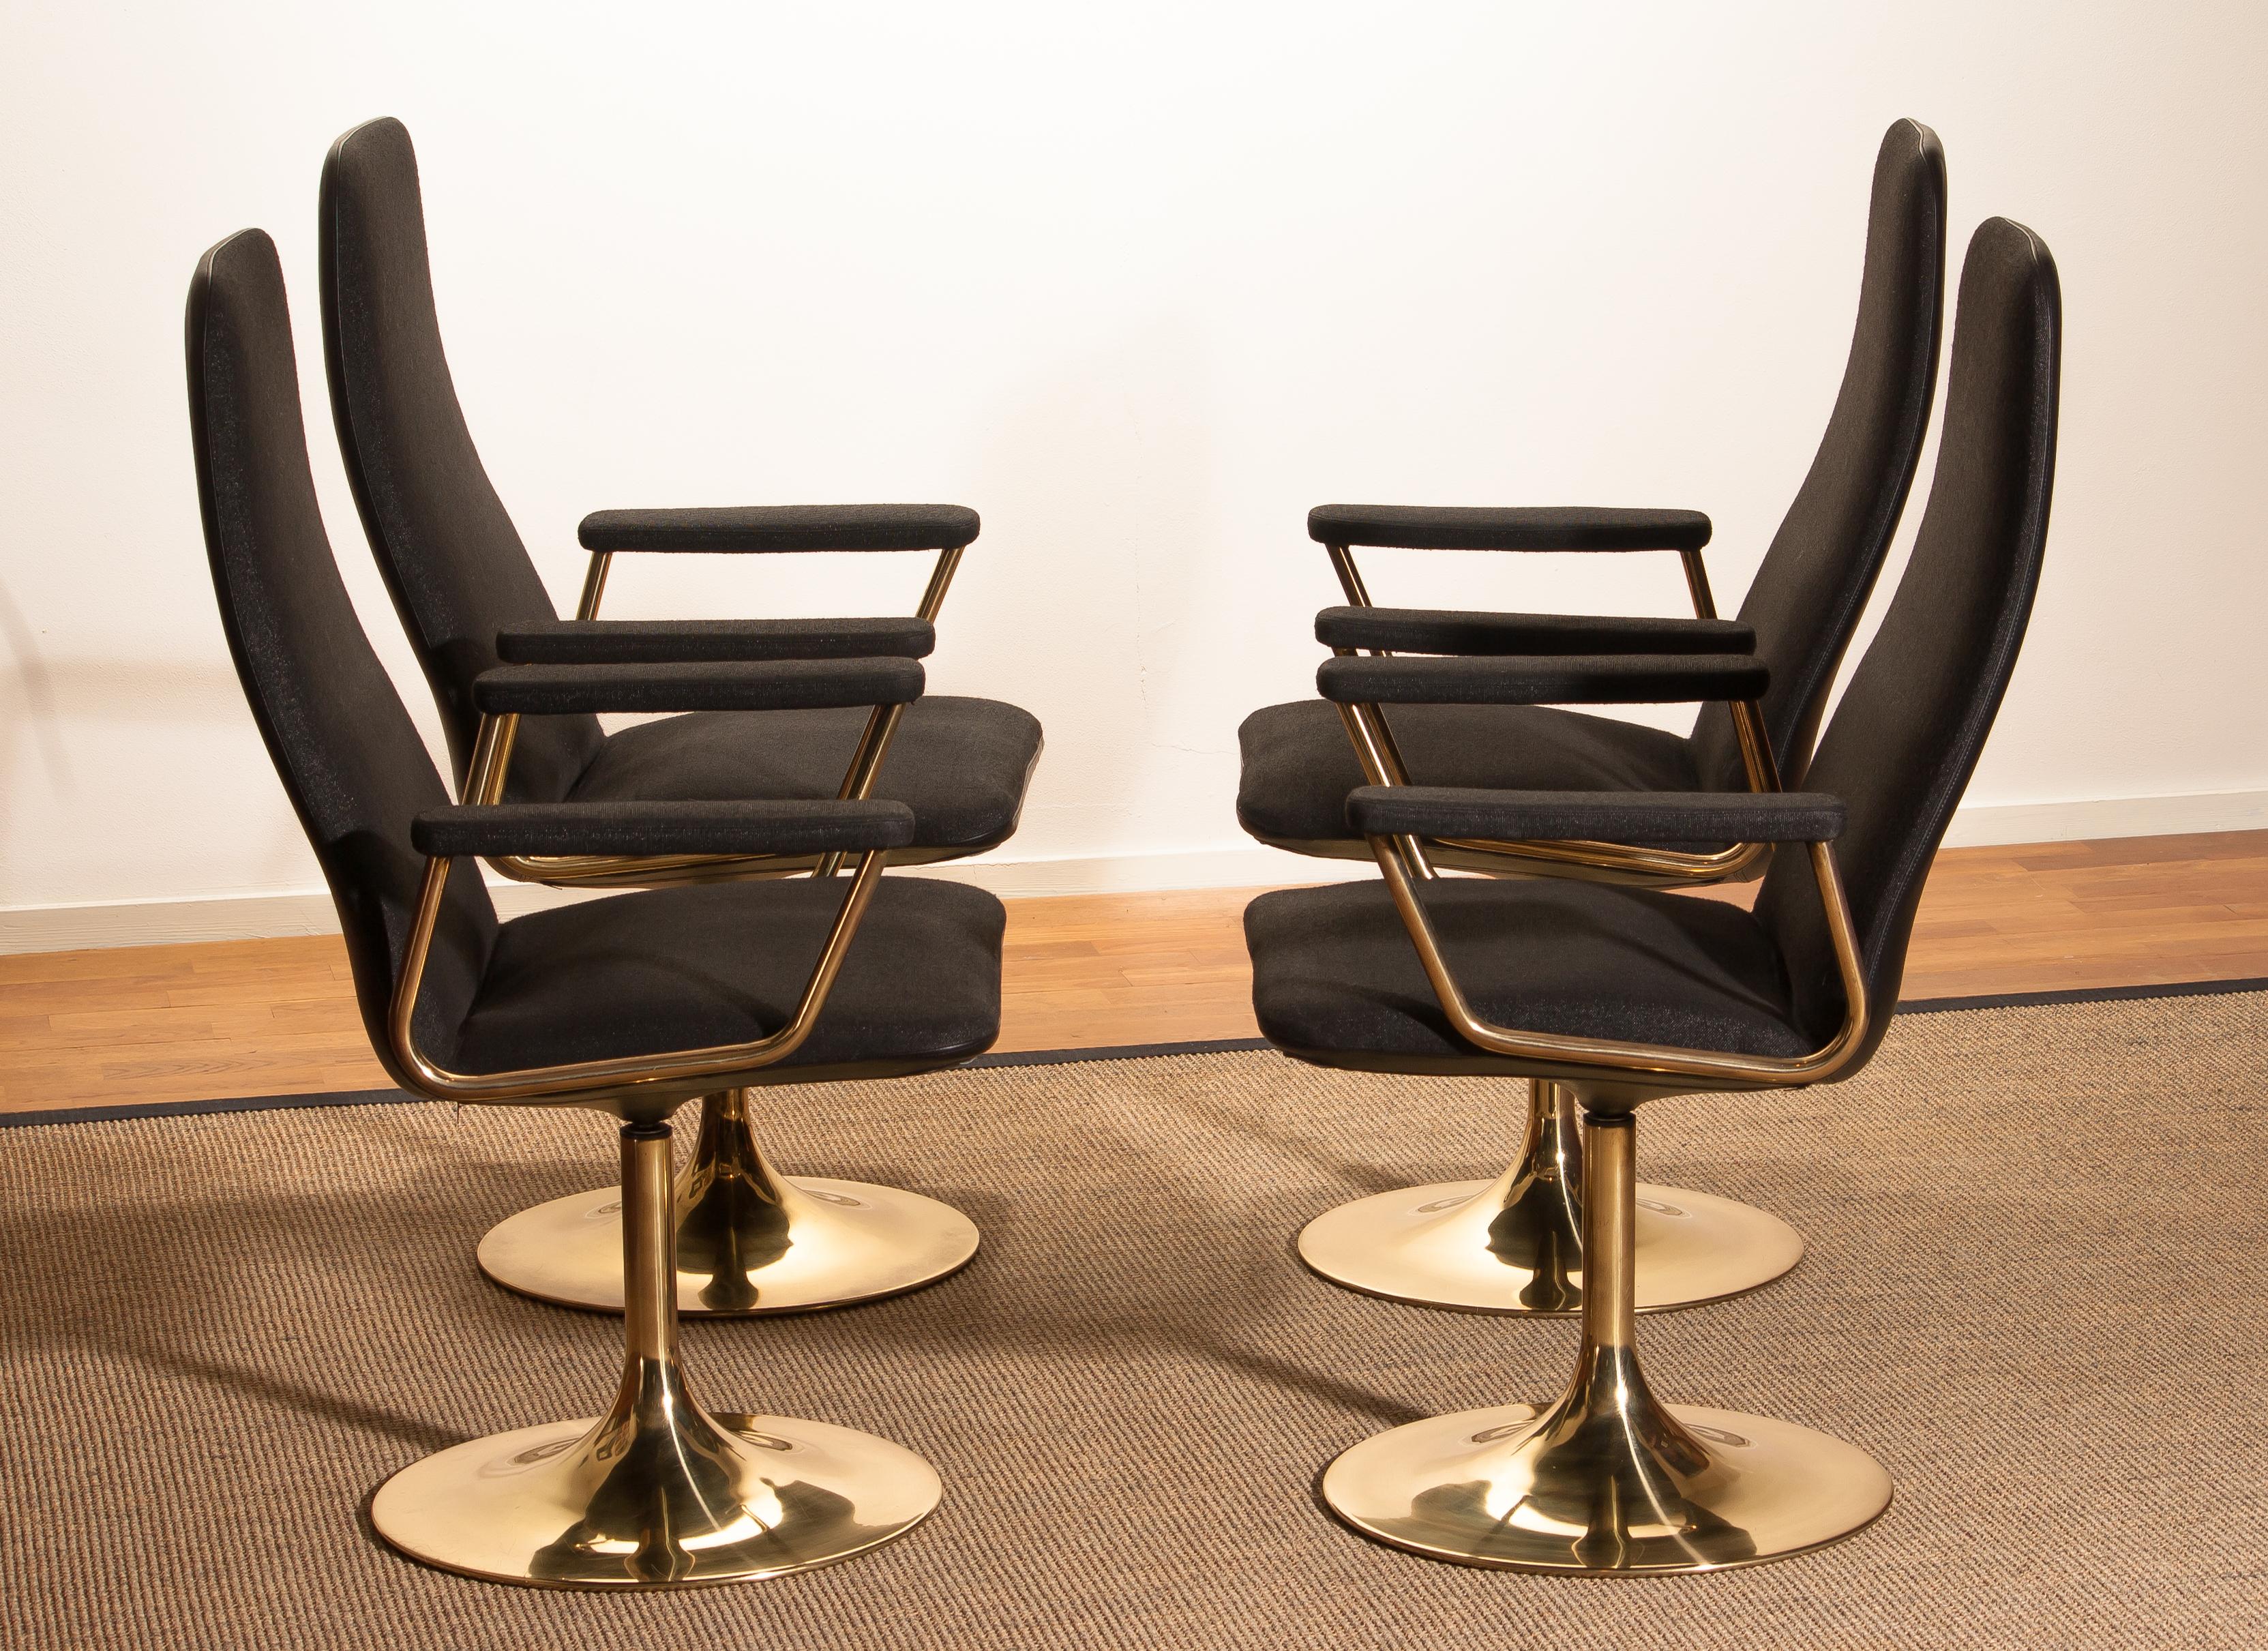 Four Golden, with Black Fabric, Armrest Swivel Chairs by Johanson Design, 1970 1